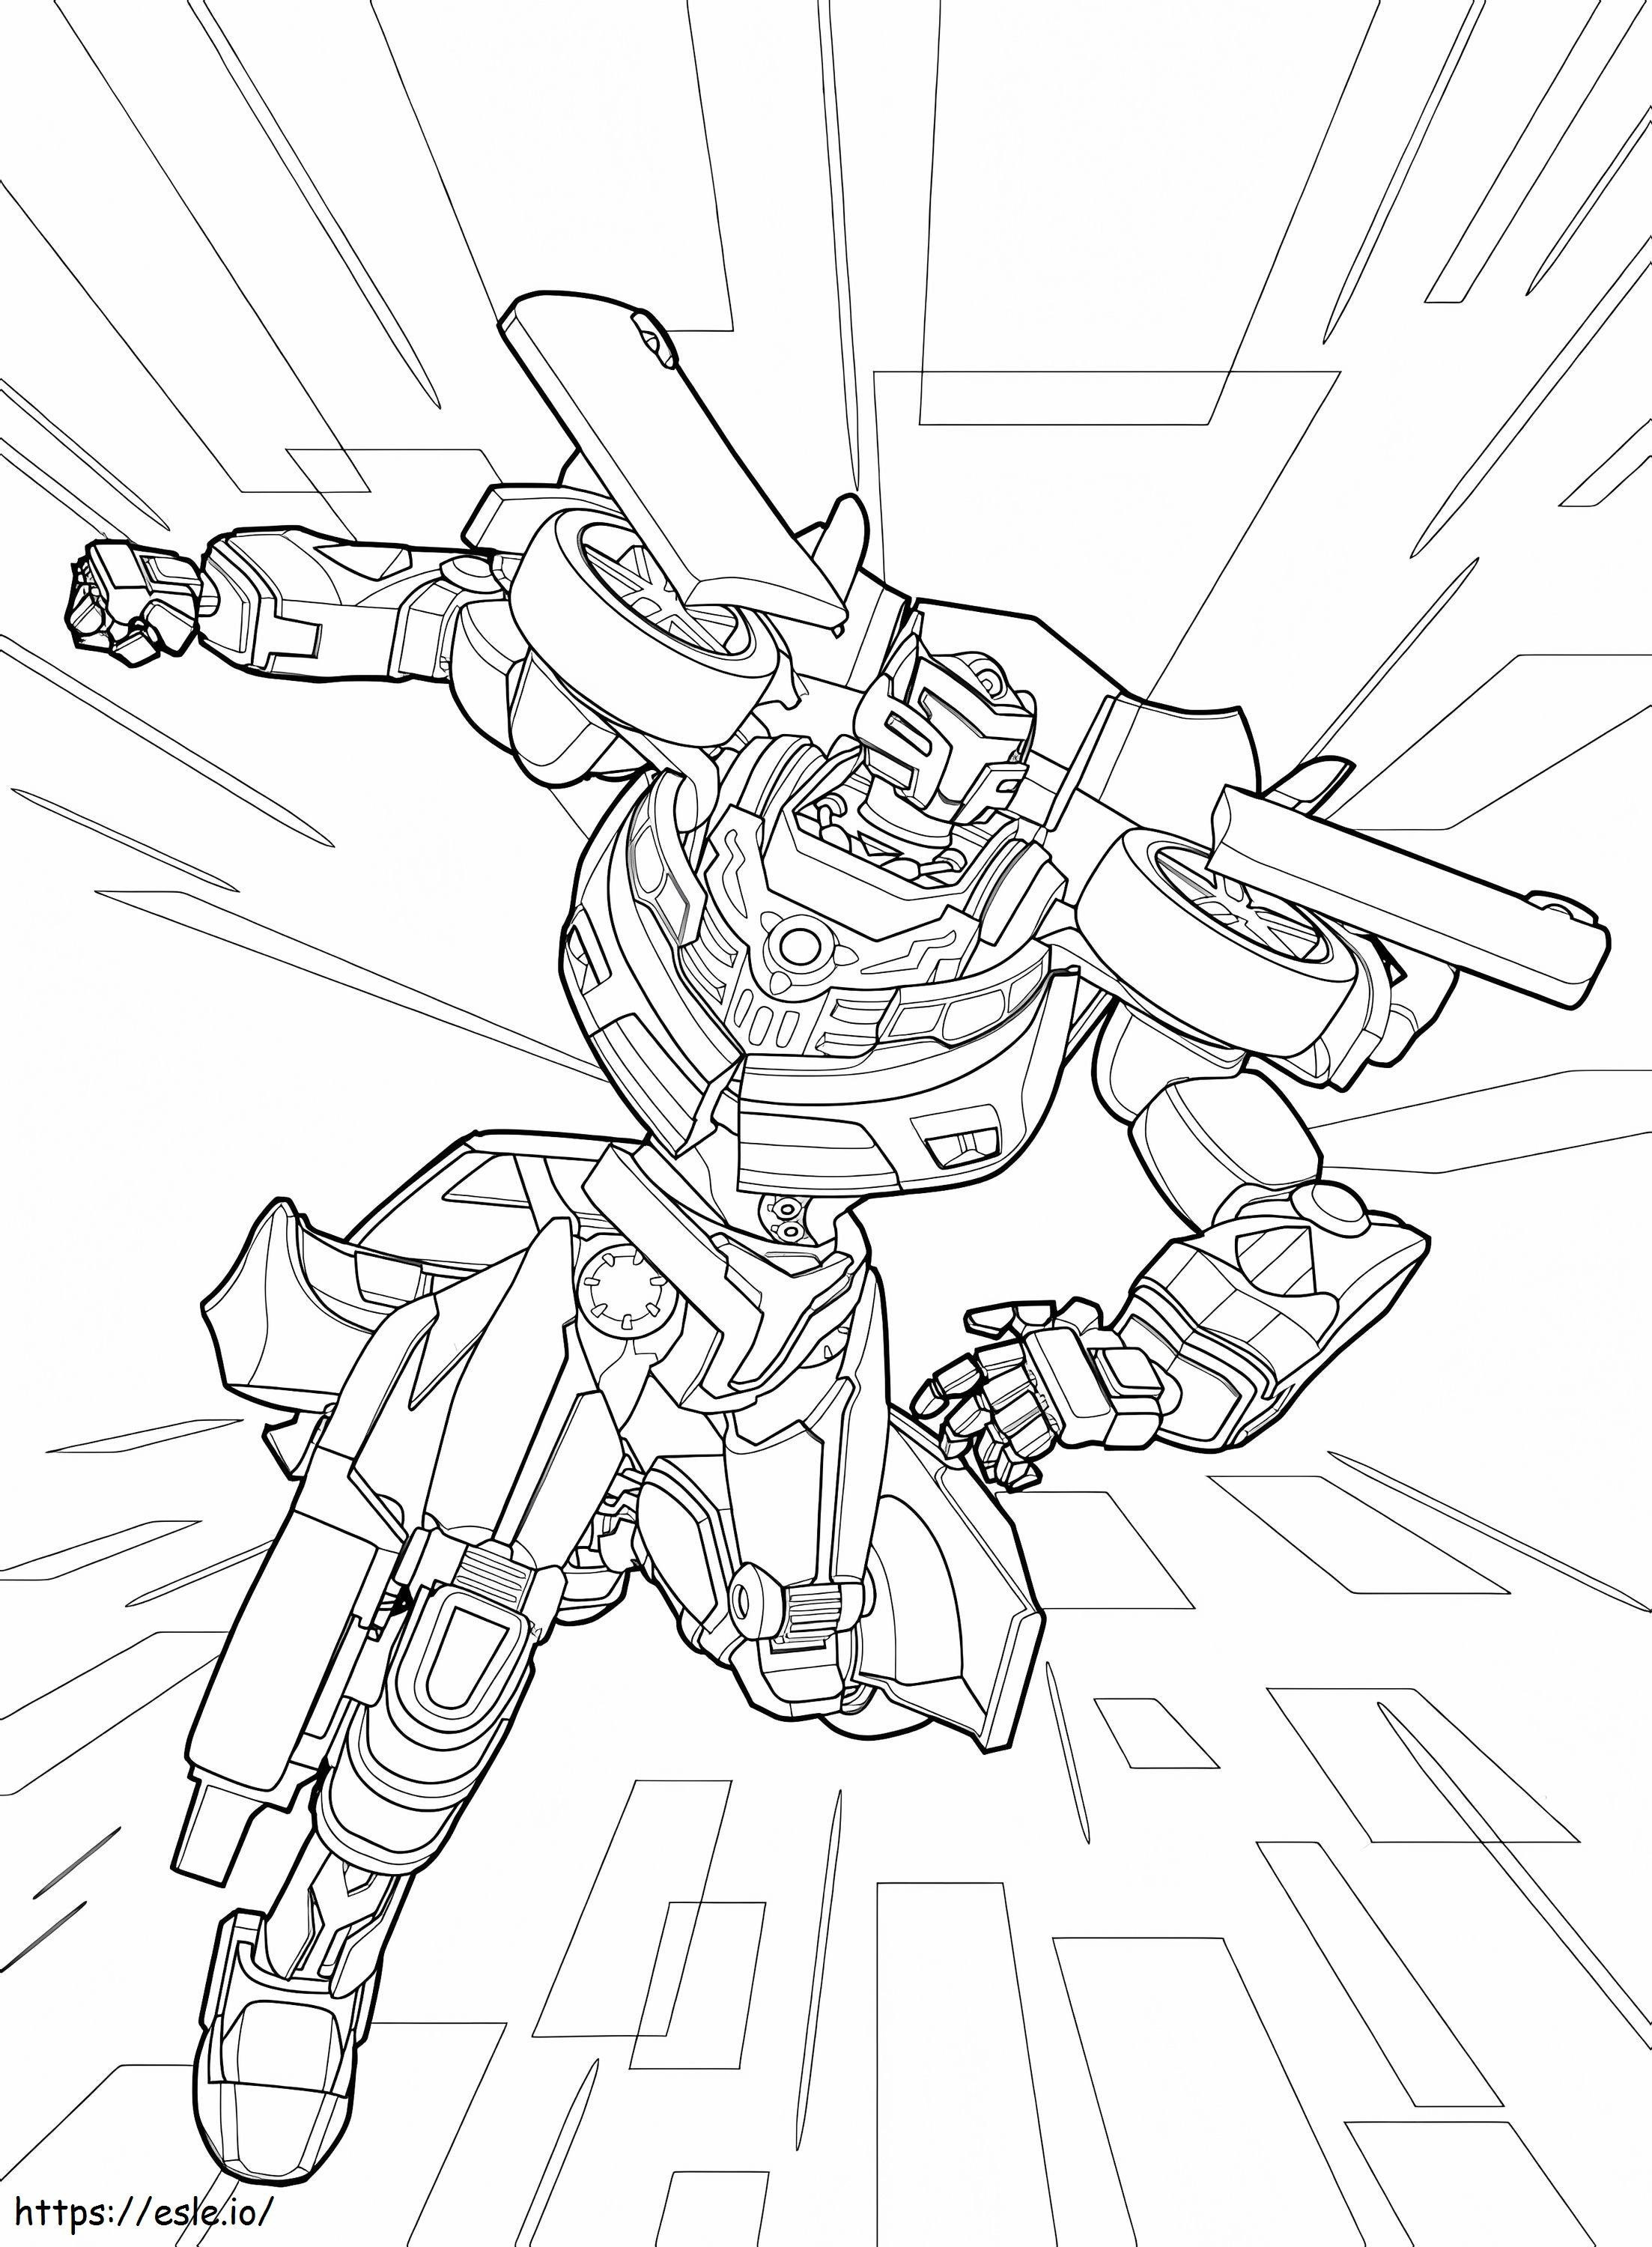 Tobots 1 coloring page